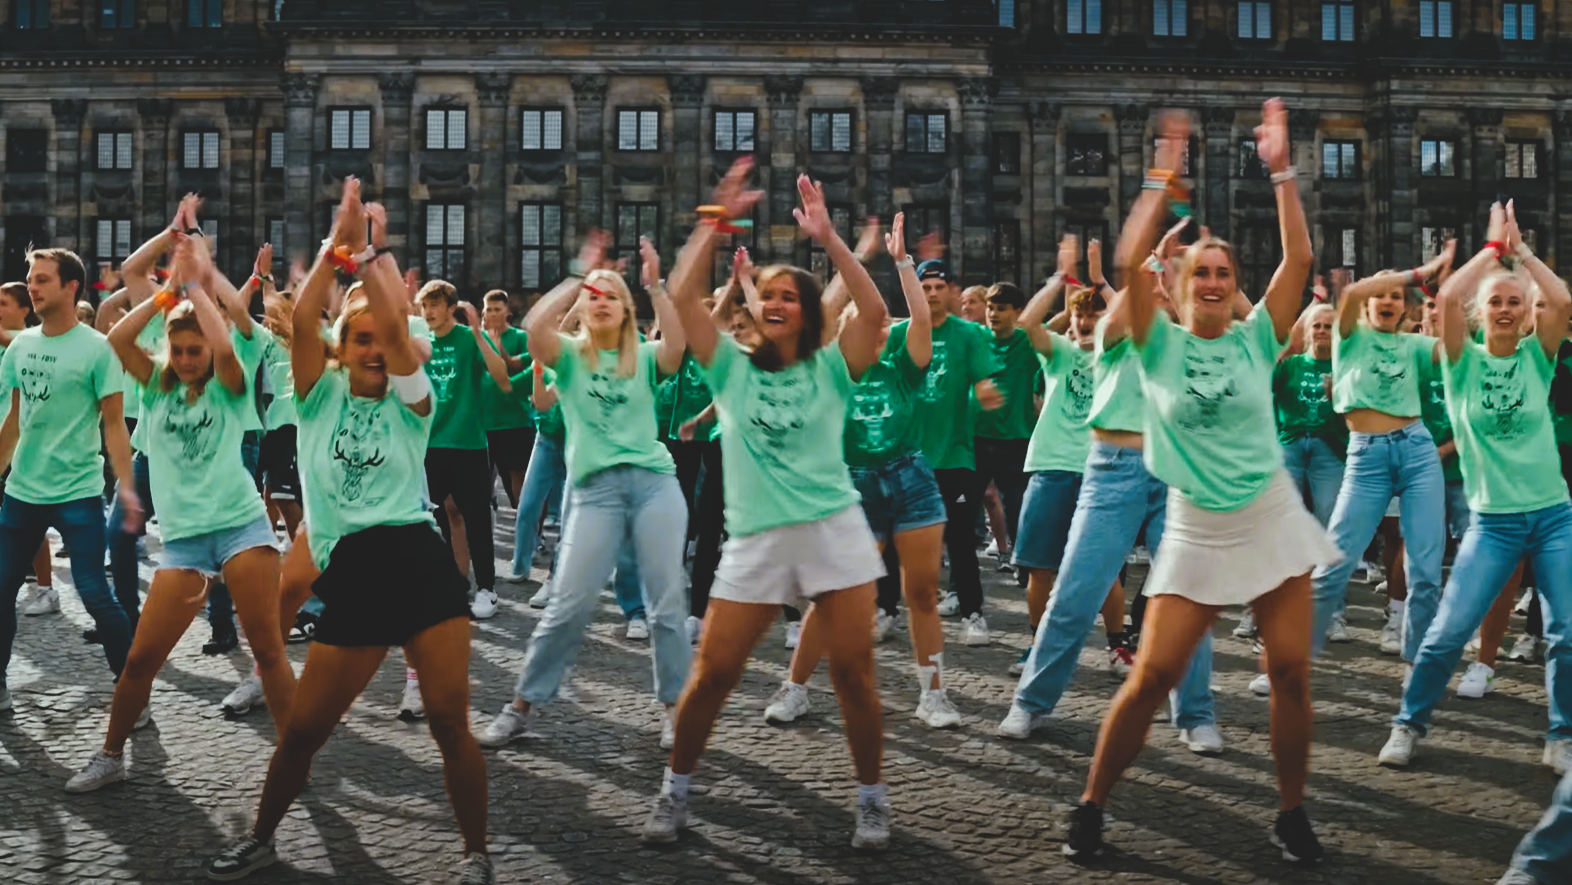 Image for the blog: The Best 15 Flash Mobs Ever